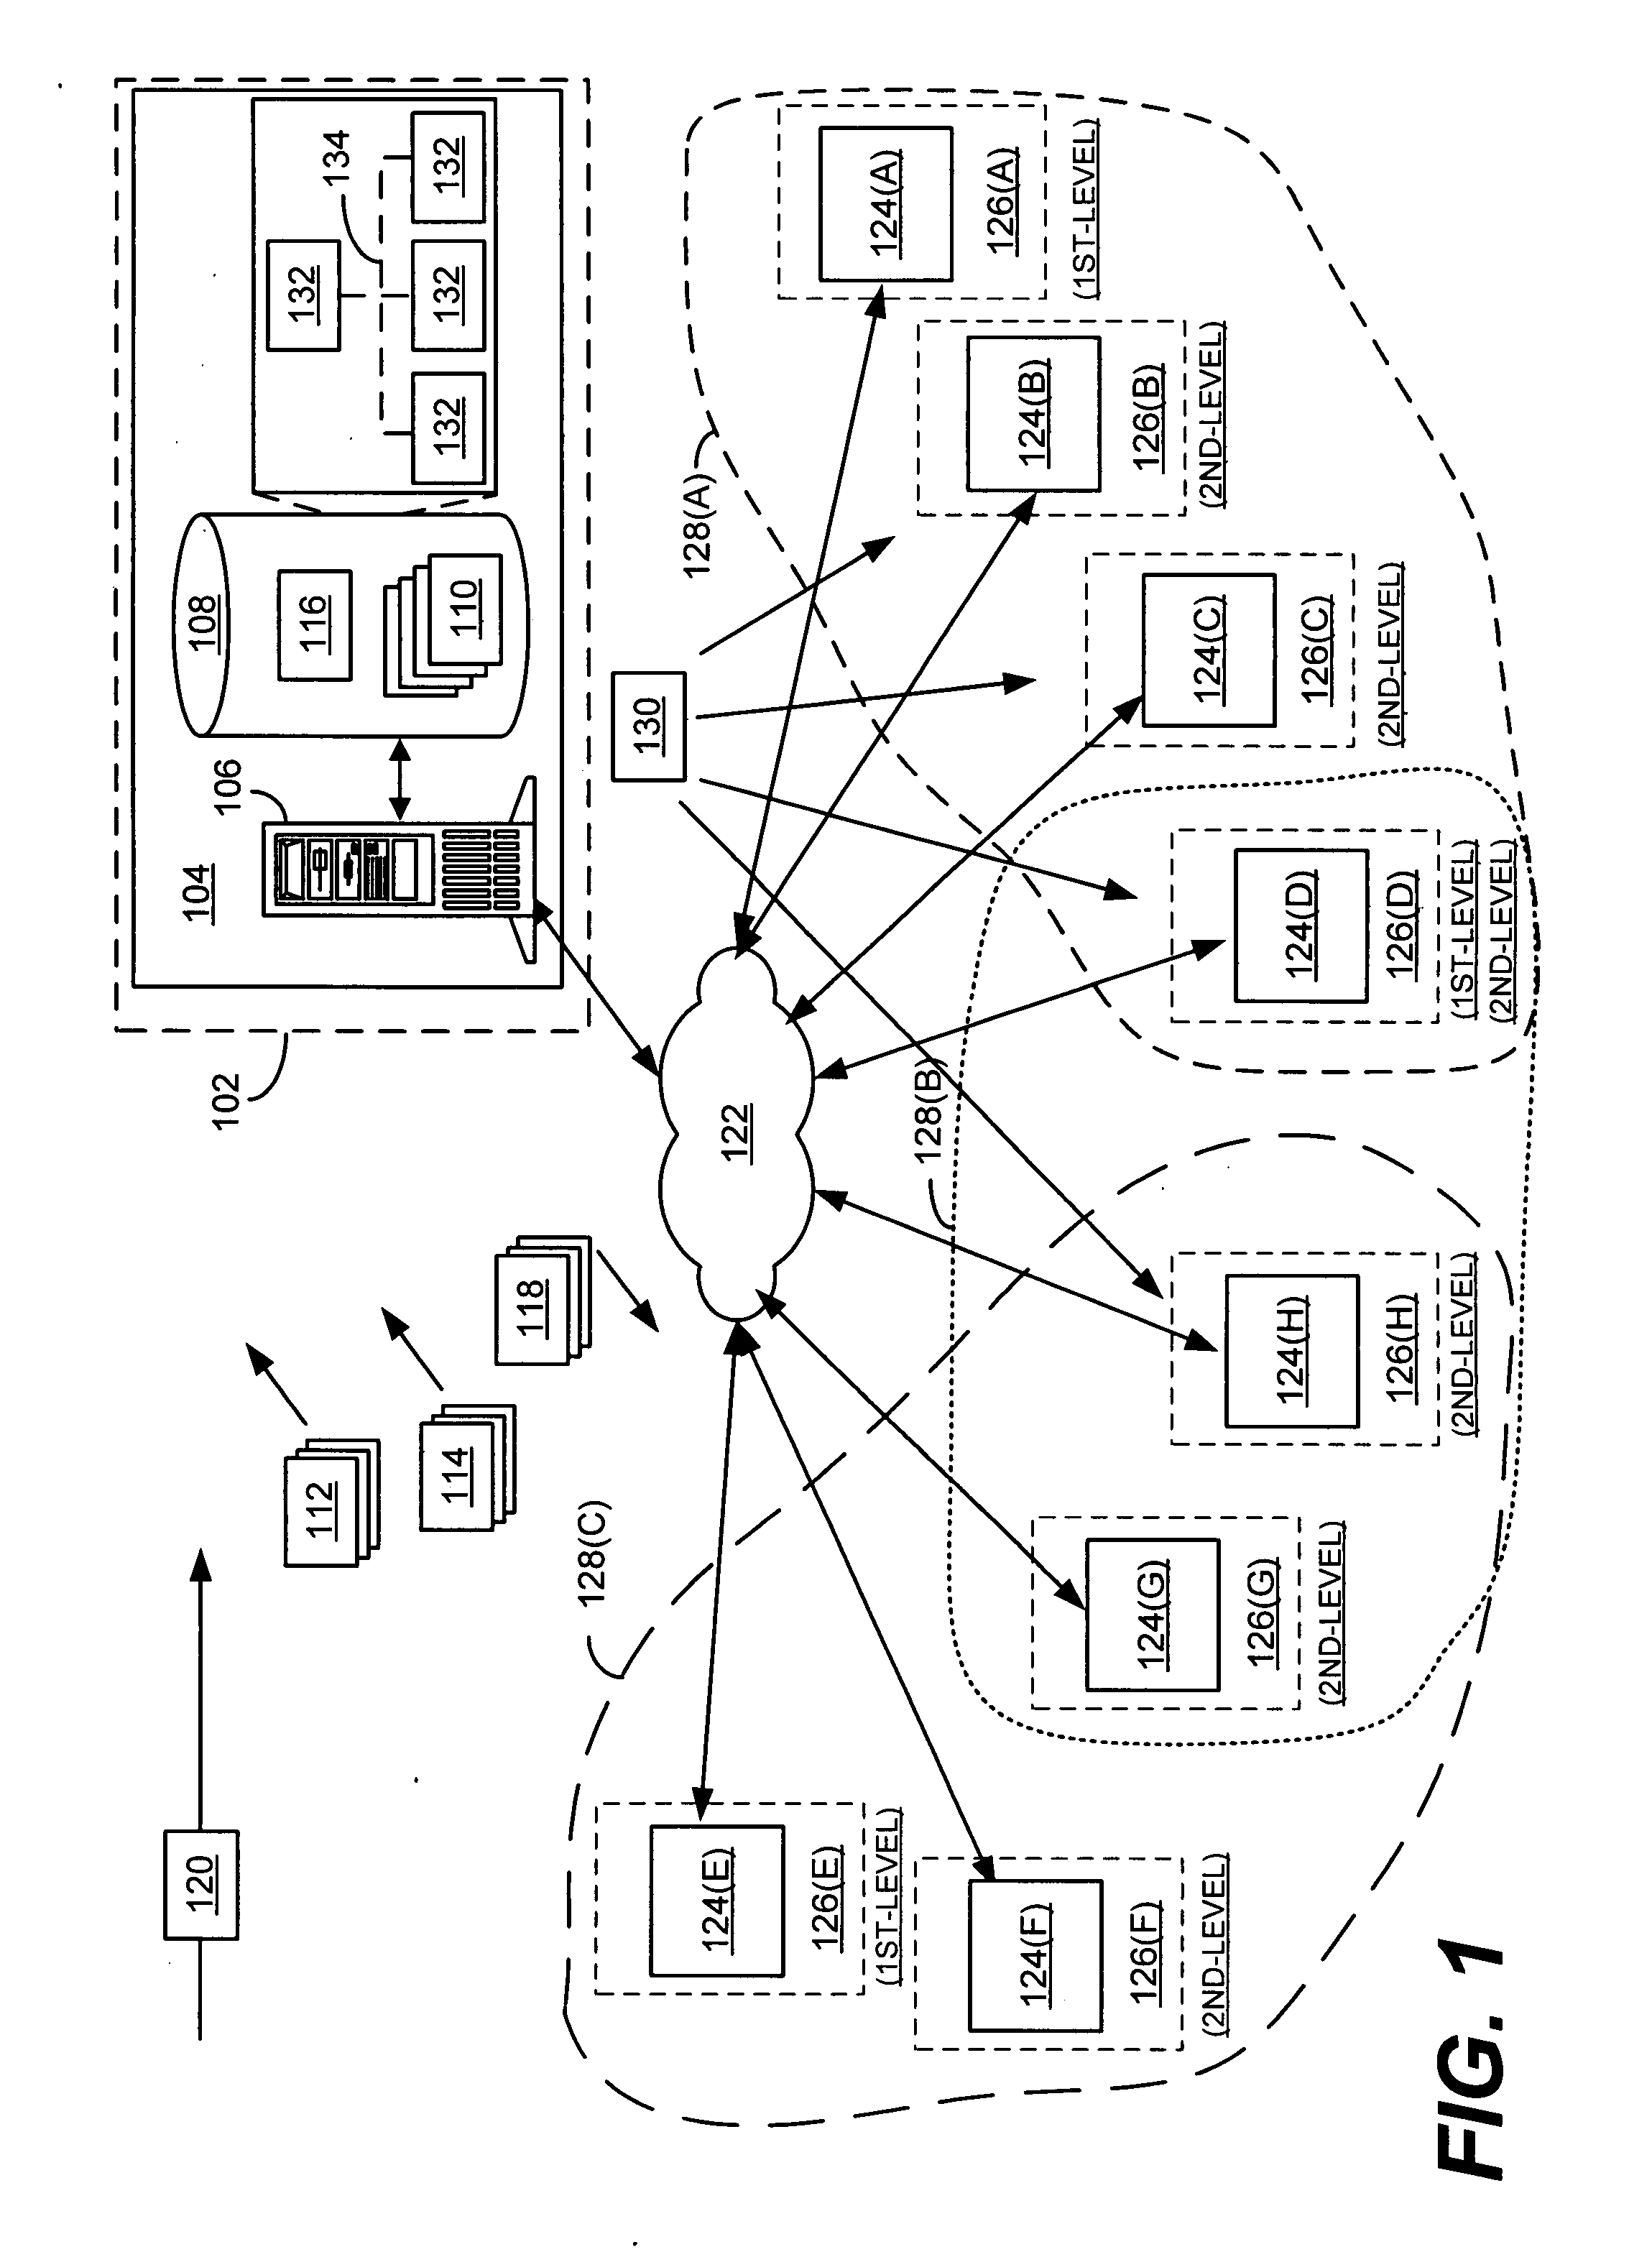 Trusted-referral systems and methods